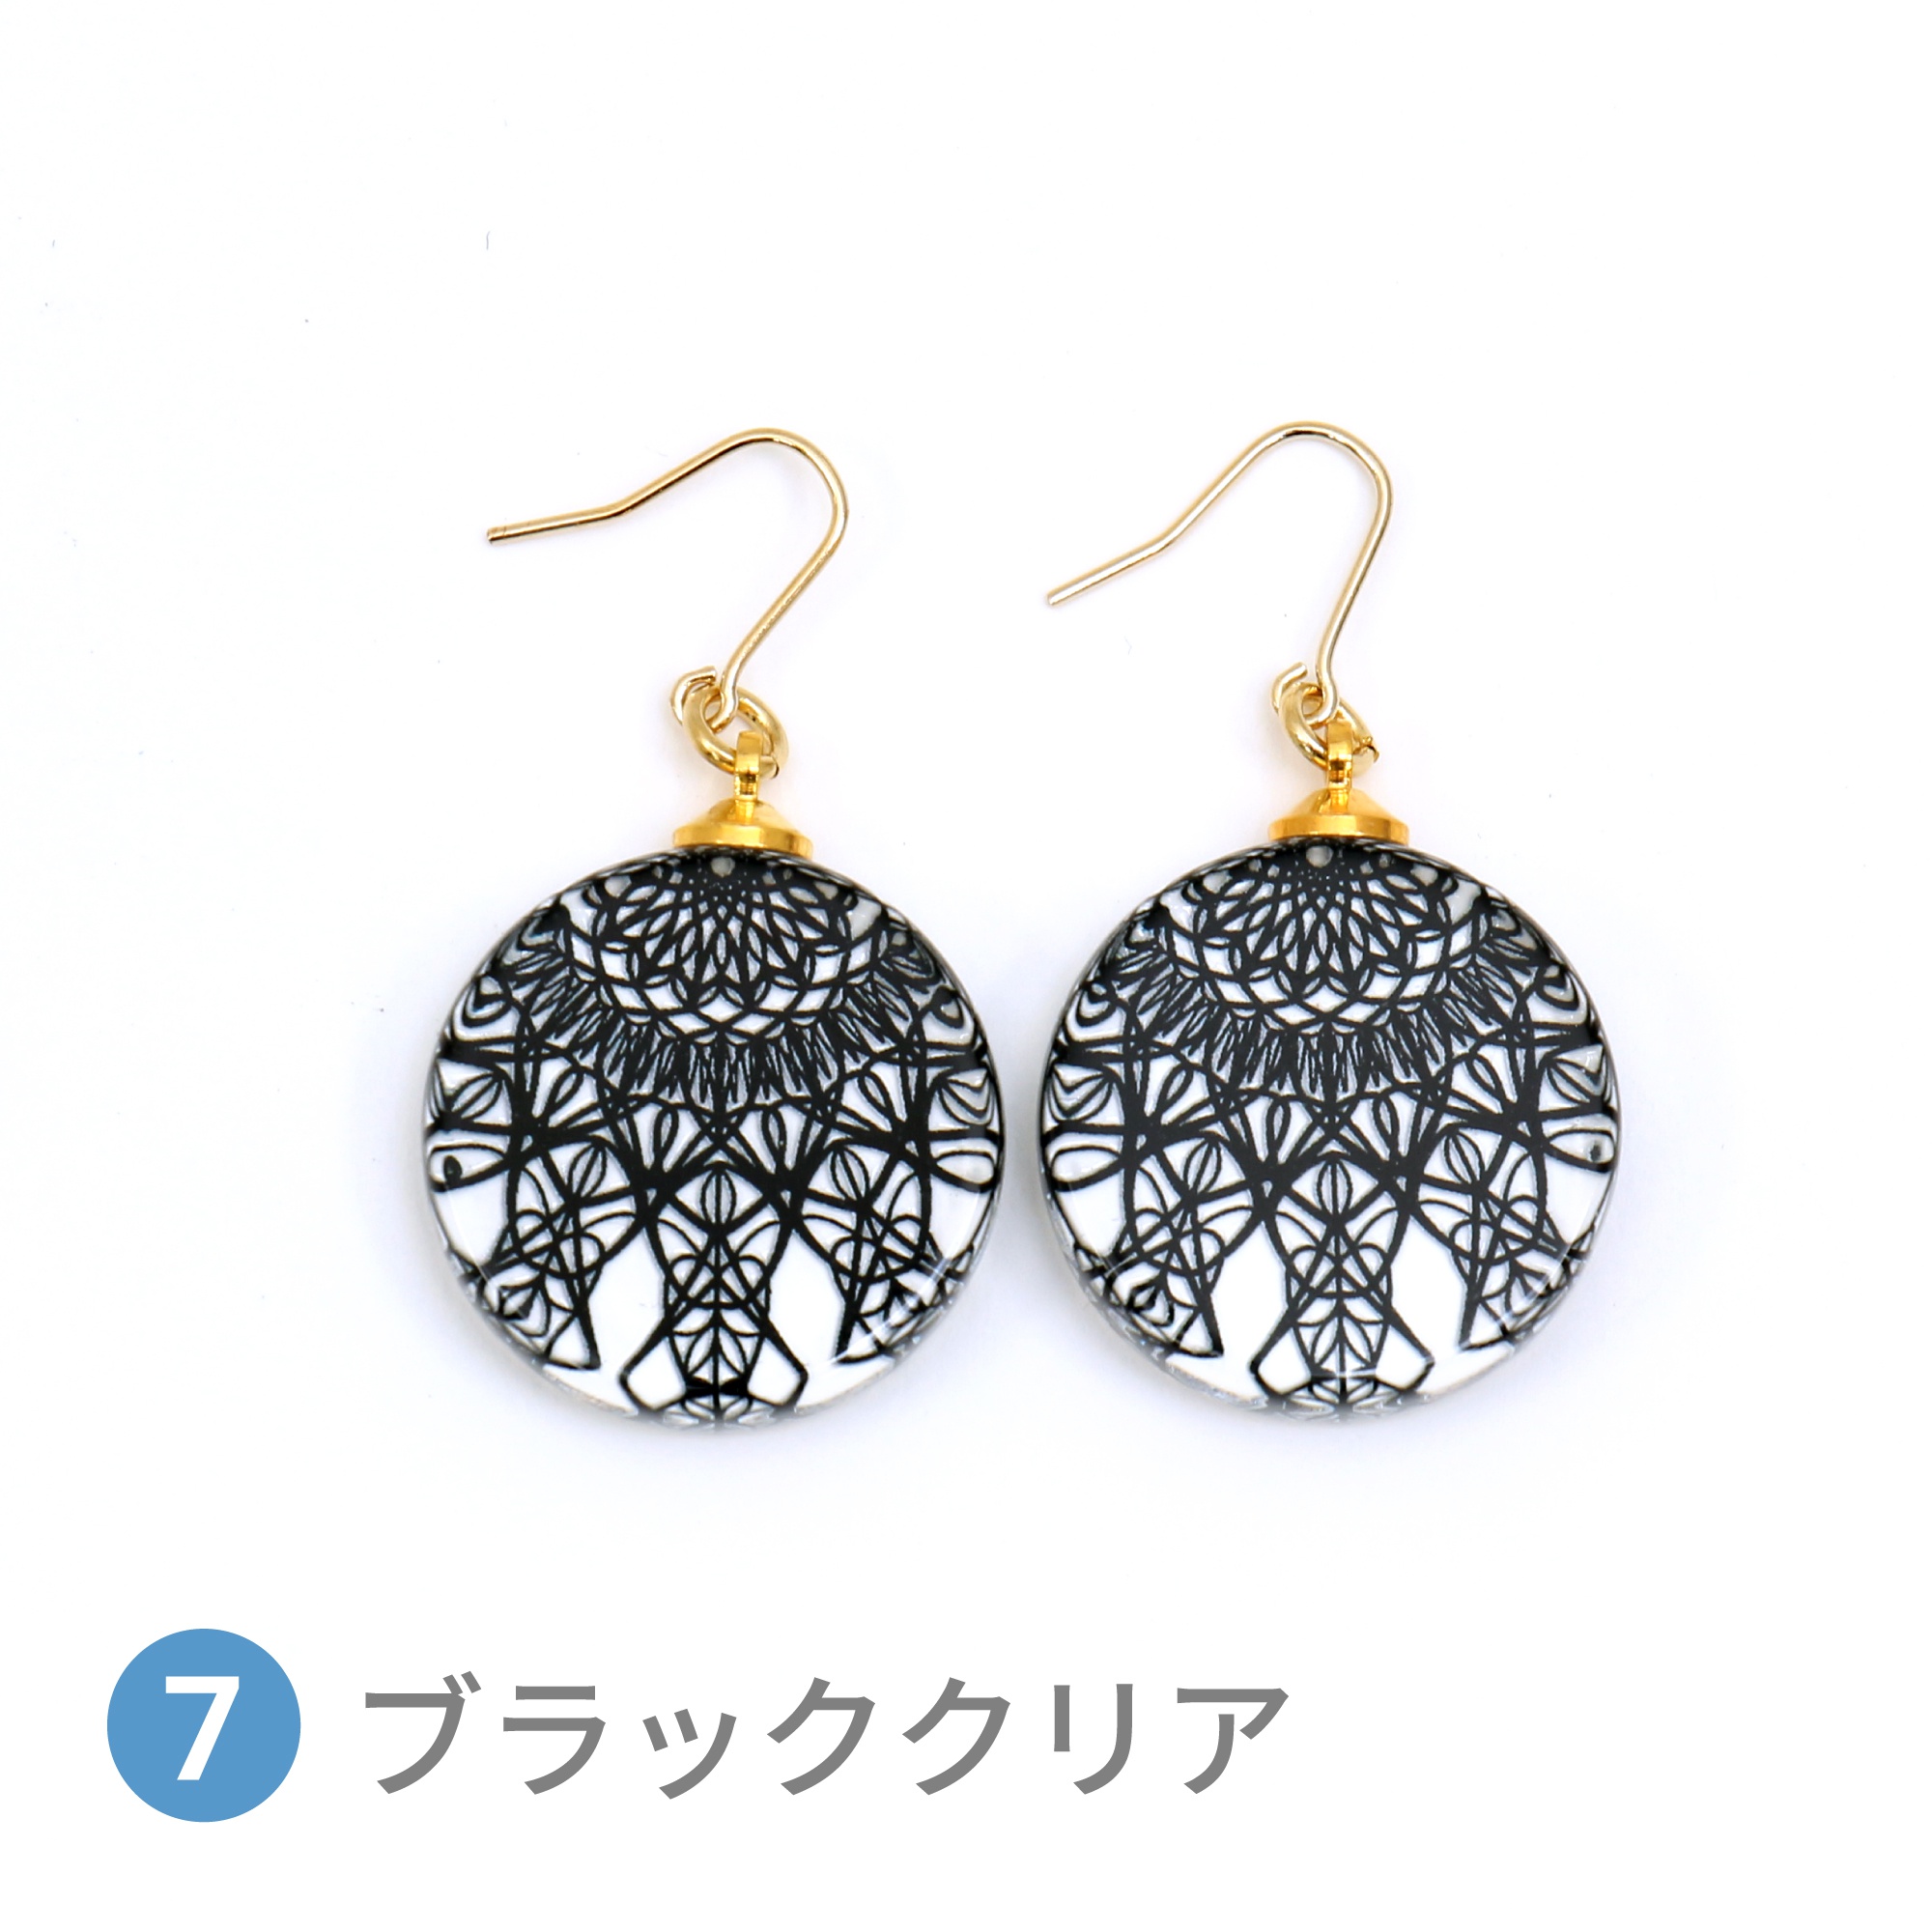 Glass accessories Pierced Earring LACE black clear round shape